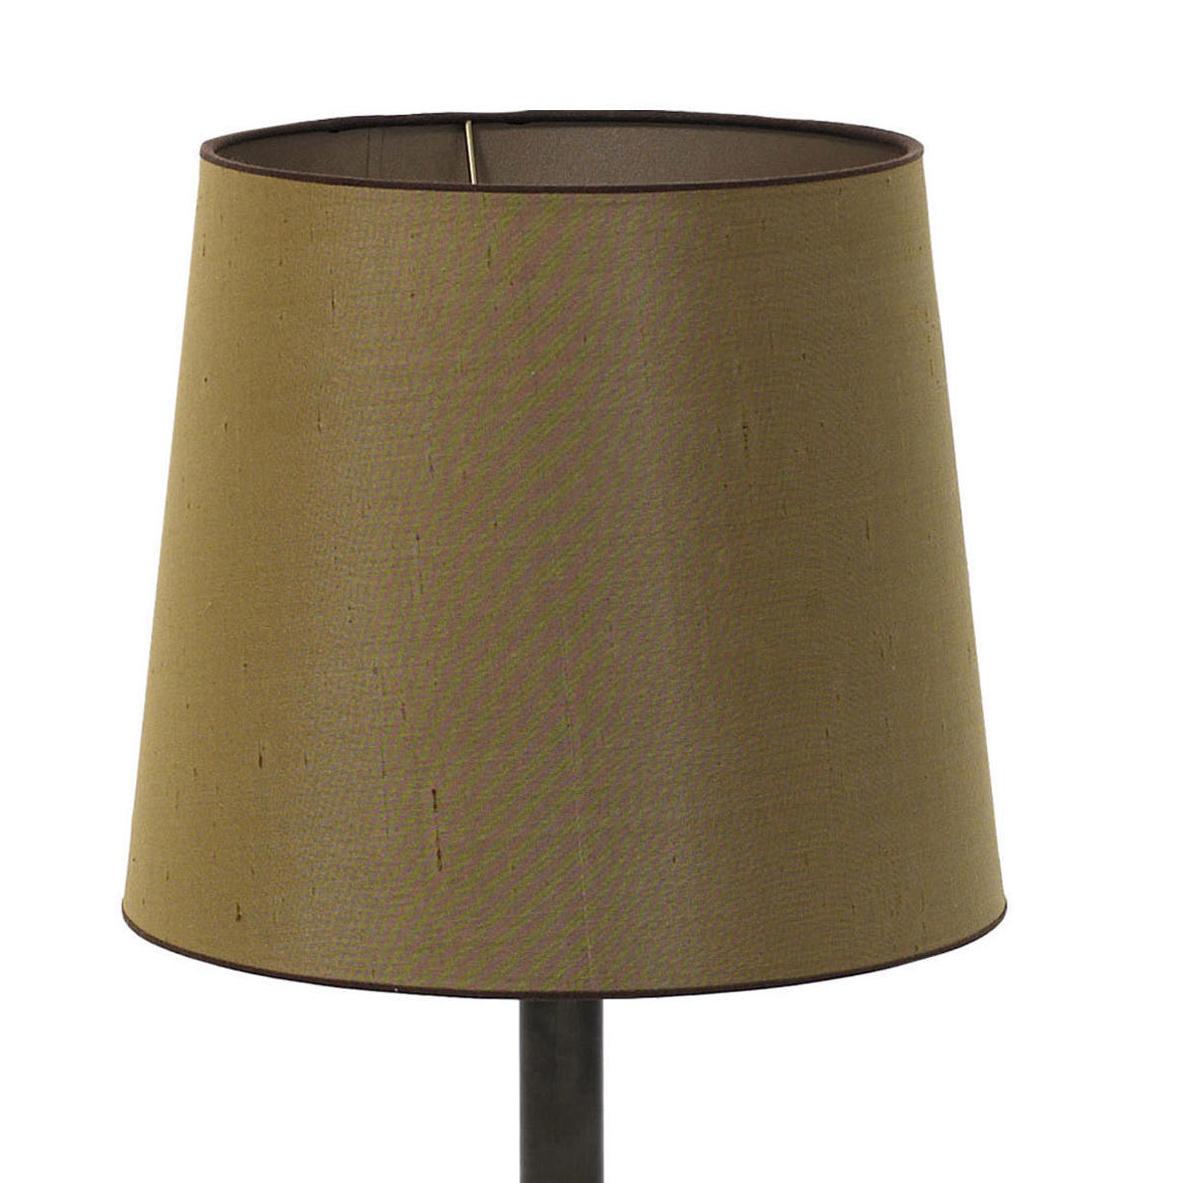 Table lamp designed by Peter Ghyczy in 1998.
Manufactured by Ghyczy (Netherlands)

The lamp can be used as a floor or a table lamp. The lamp has a dimmer (40cm from the table lamp). The pedestal is made of a grey mat Belgium stone with a brass